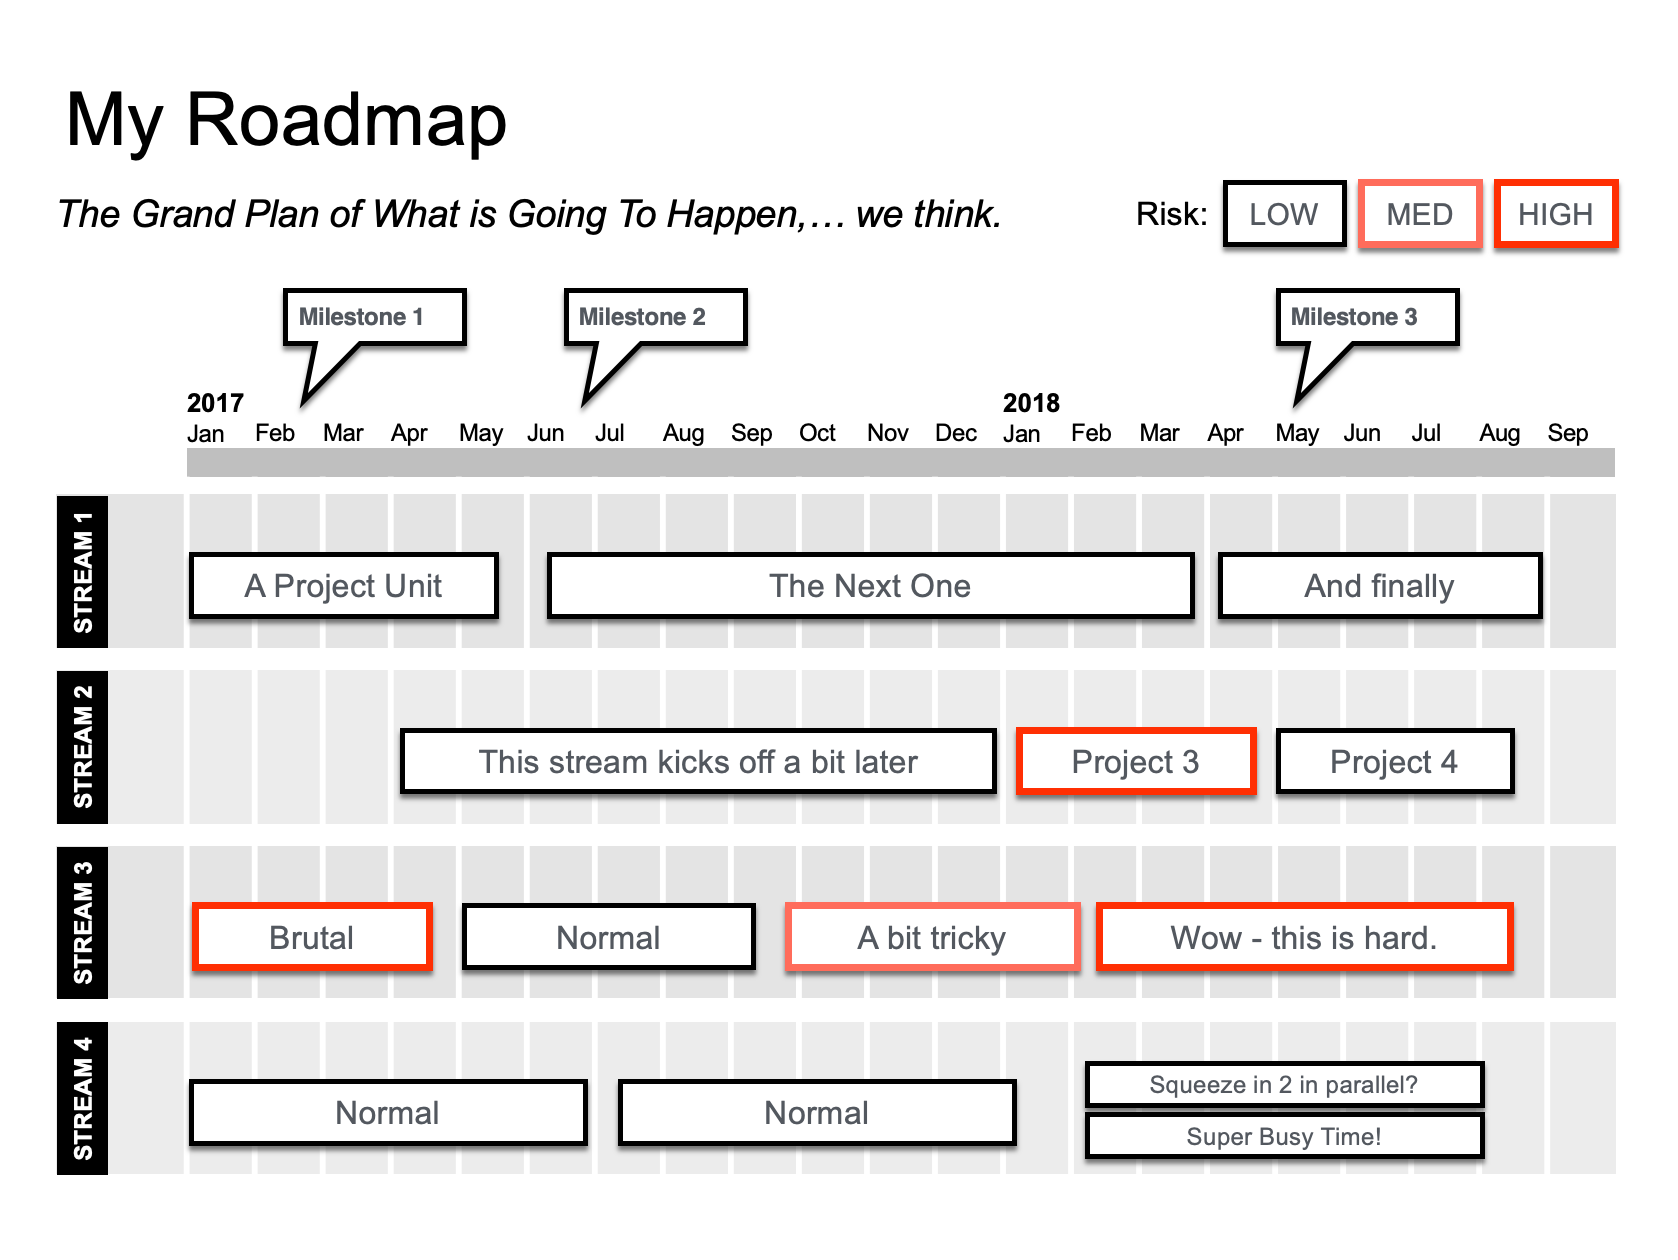 Set your milestones along the top of the timeline on your roadmap.